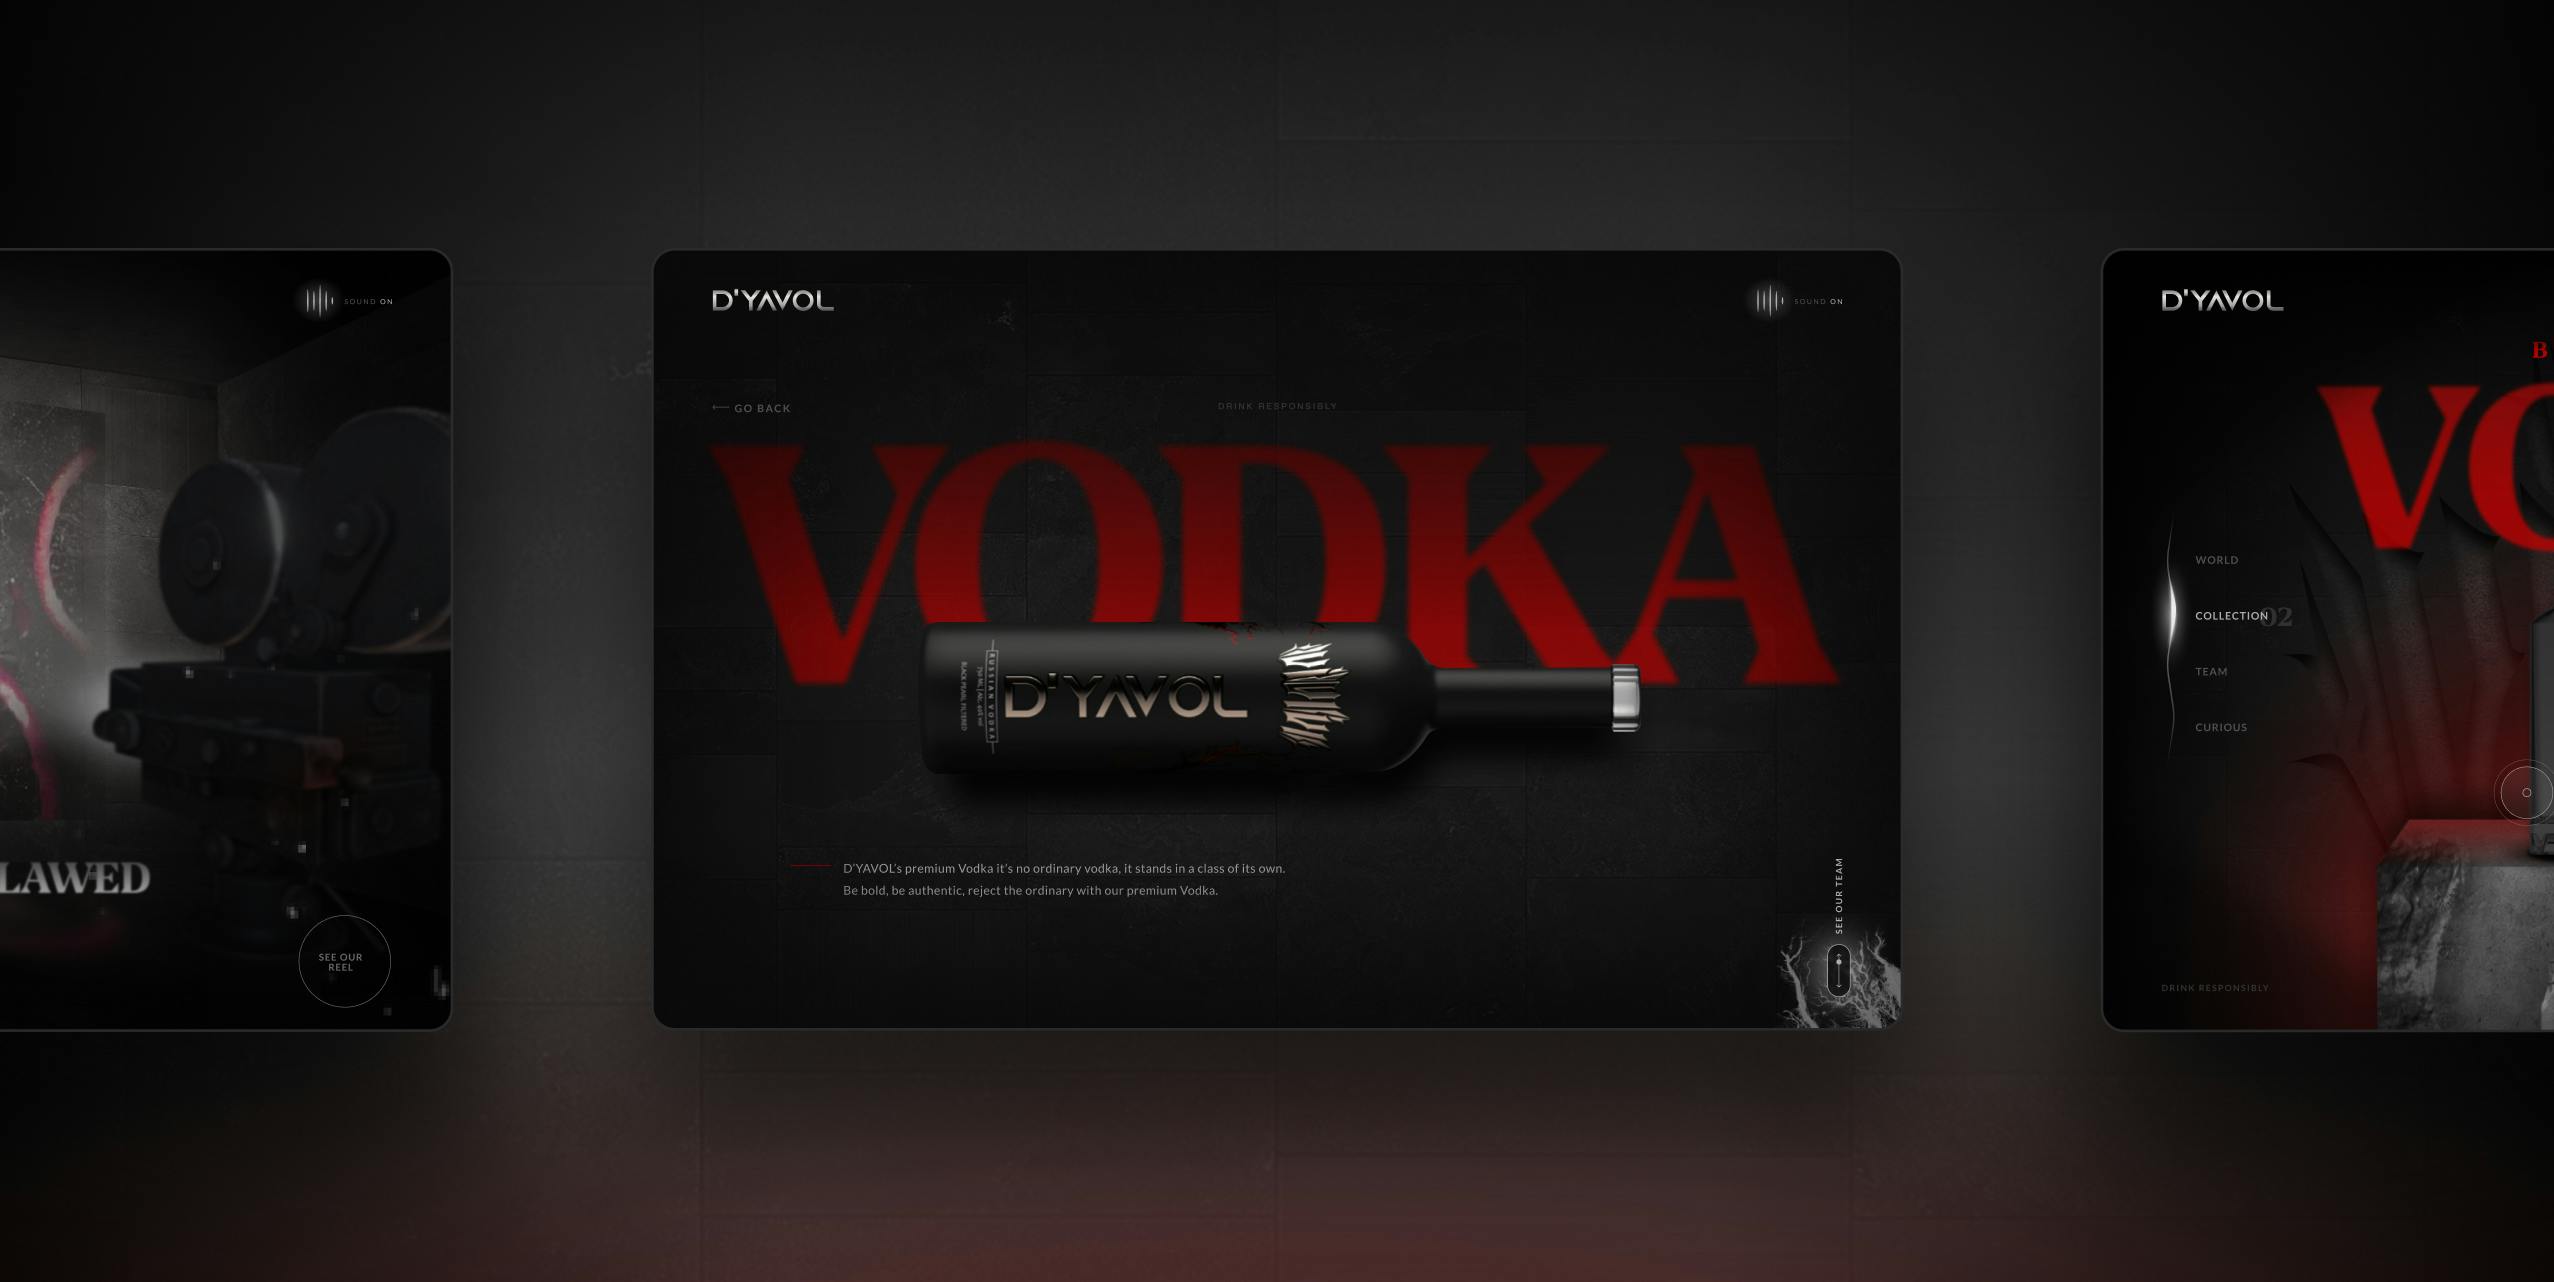 A NEW WEBSITE FOR THE LAUNCH OF D’YAVOL VODKA